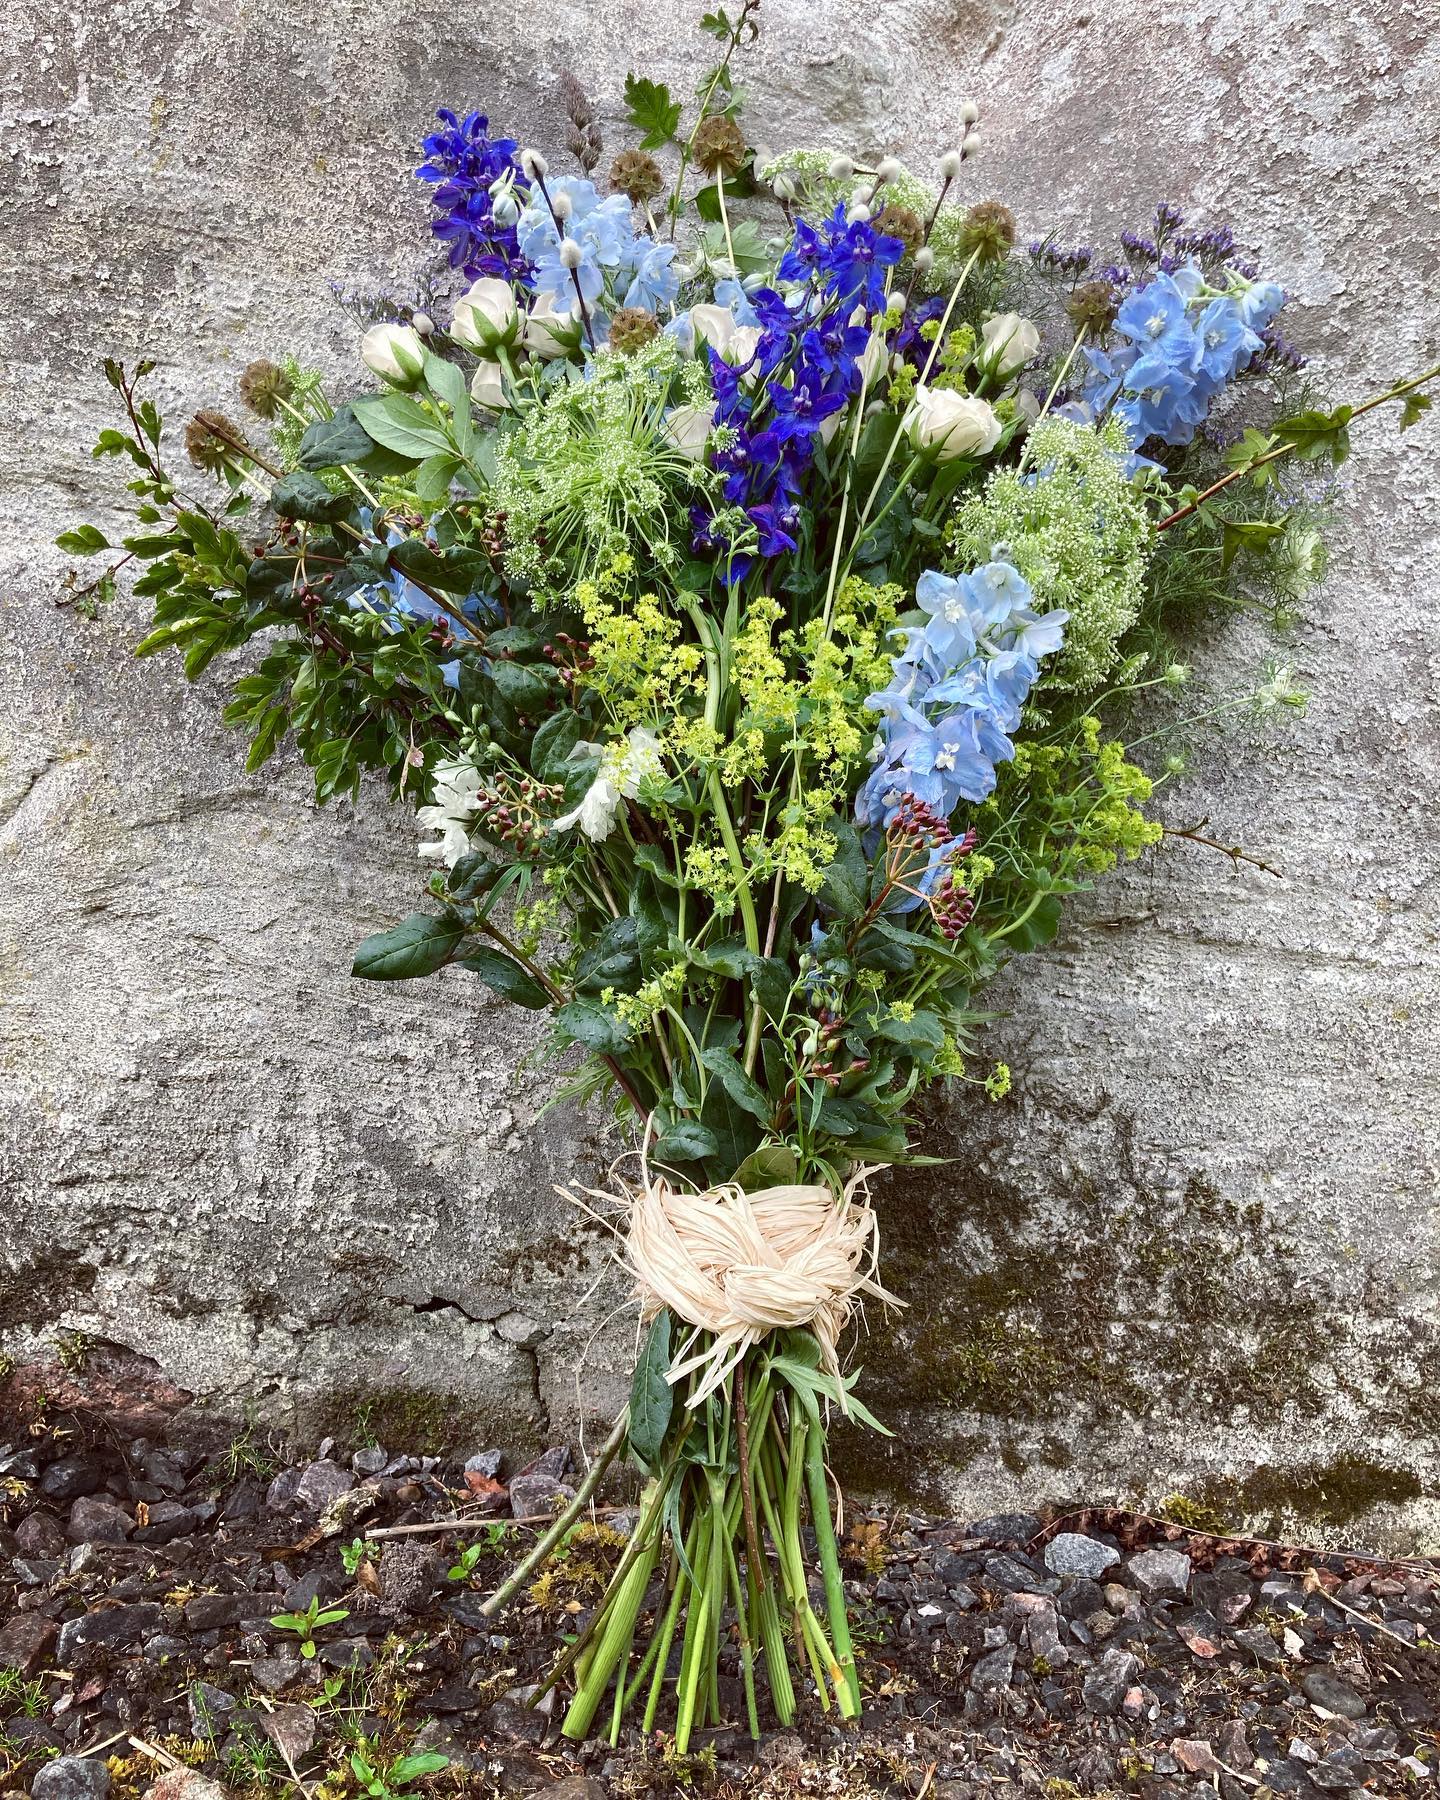 Beautiful natural eco funeral flowers created by  Rachel's Country flowers who is a specialist funeral florist situated in the Scottish Highlands. Covering Edderton, Tain, Seaboard Villages, Balintore, Hilton, Fearn, Portmahomack, Invergordon, Alness, Dornoch, Golspie, Ardgay, Lairg. Natural bespoke casket sprays, sheafs and wreaths